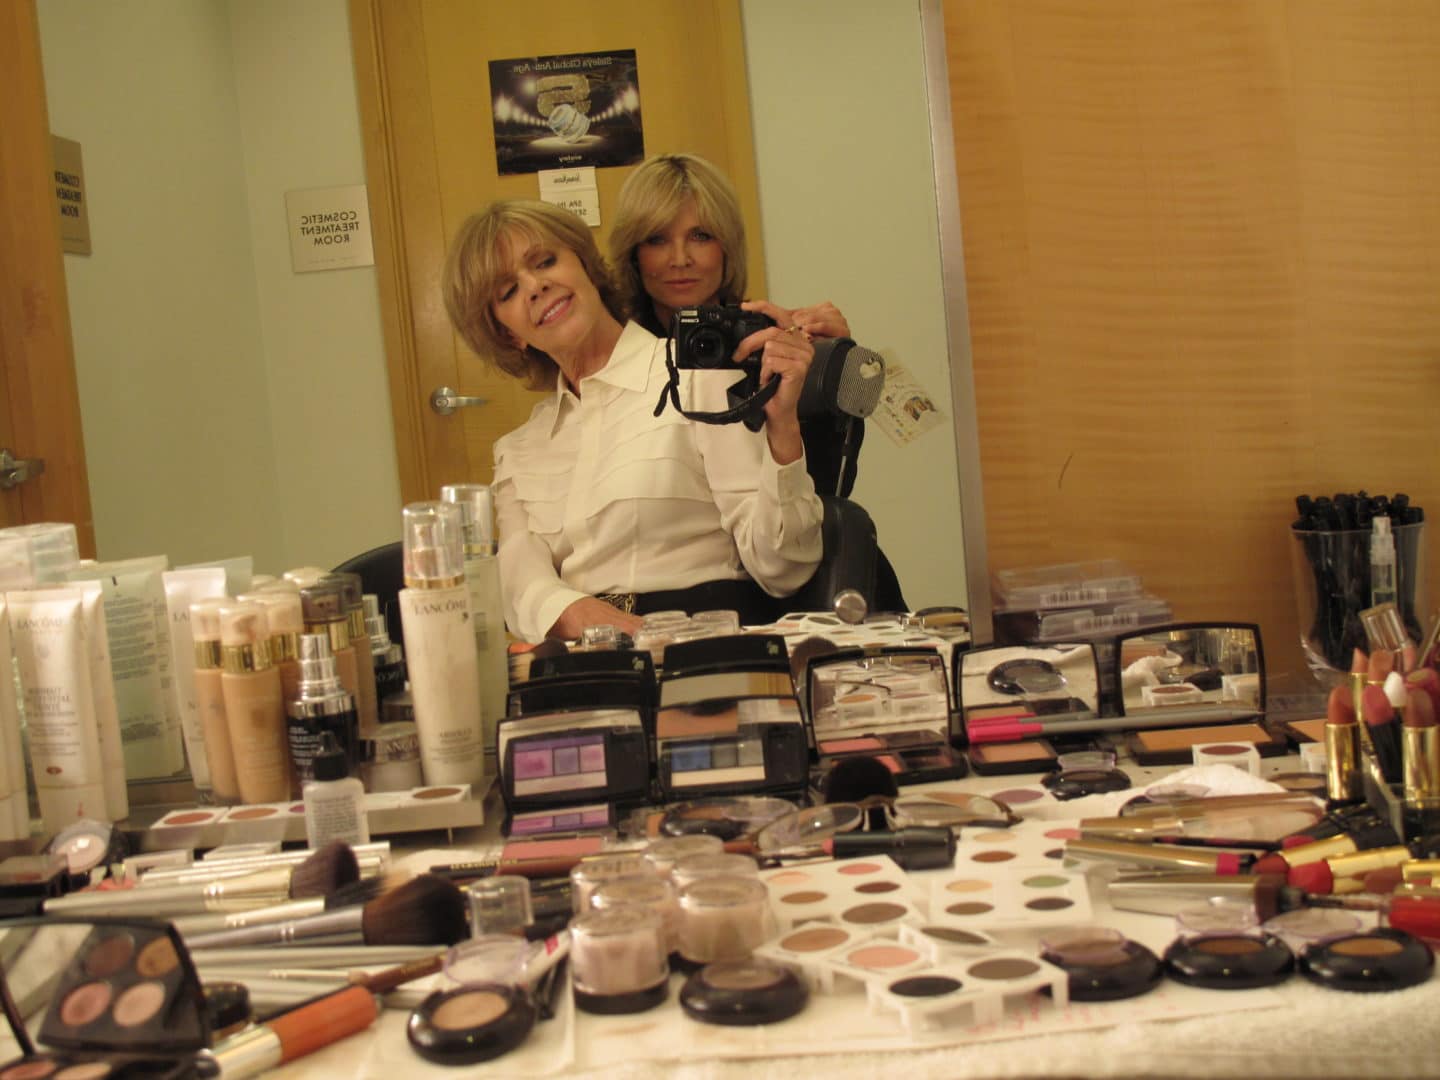 BRENDA COFFEE & SANDY LINTER, 2011. Sandy did not do my makeup the day this photo was taken. We were talking about her new book, Makeup Wakeup. The first time she did my makeup I was 21. 